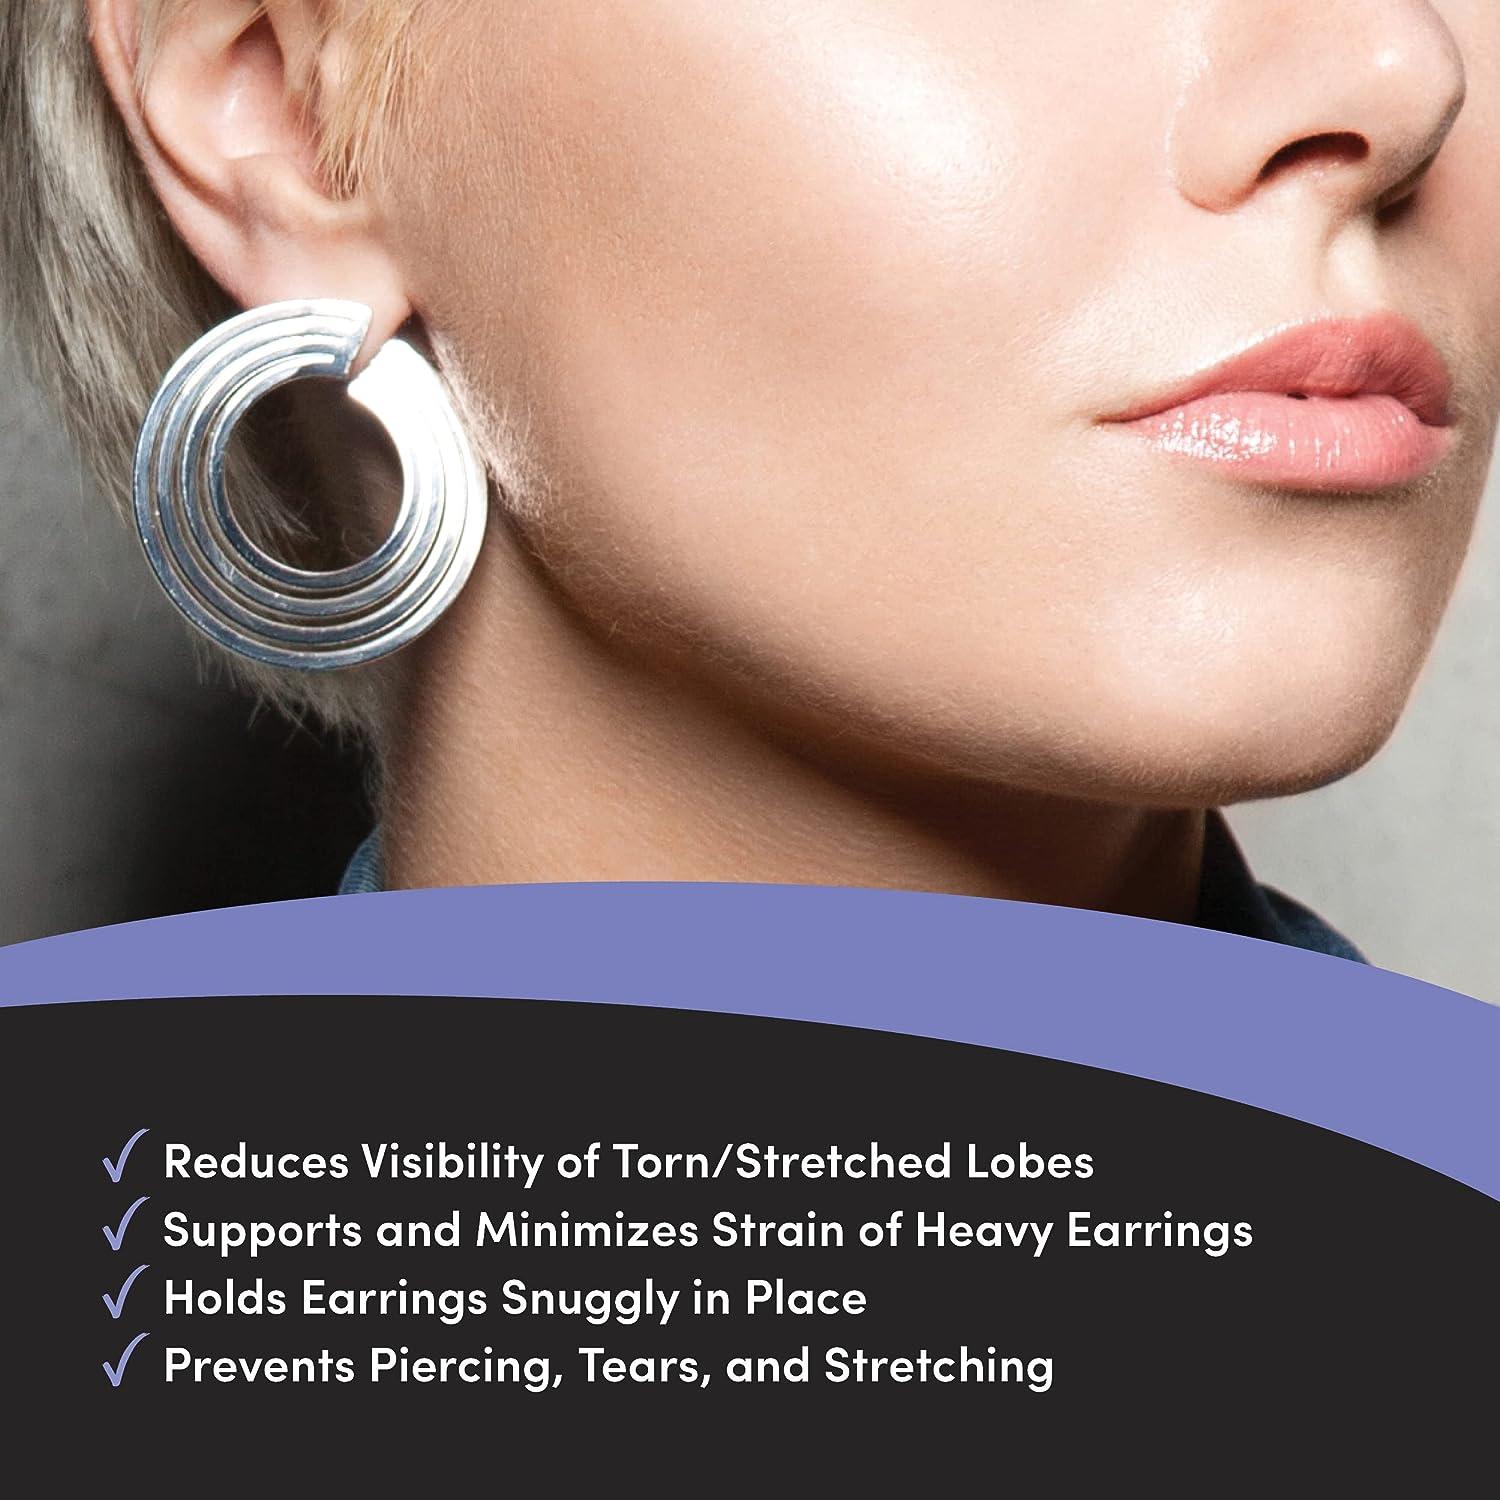 Lobe Miracle- Clear Earring Support Patches - India